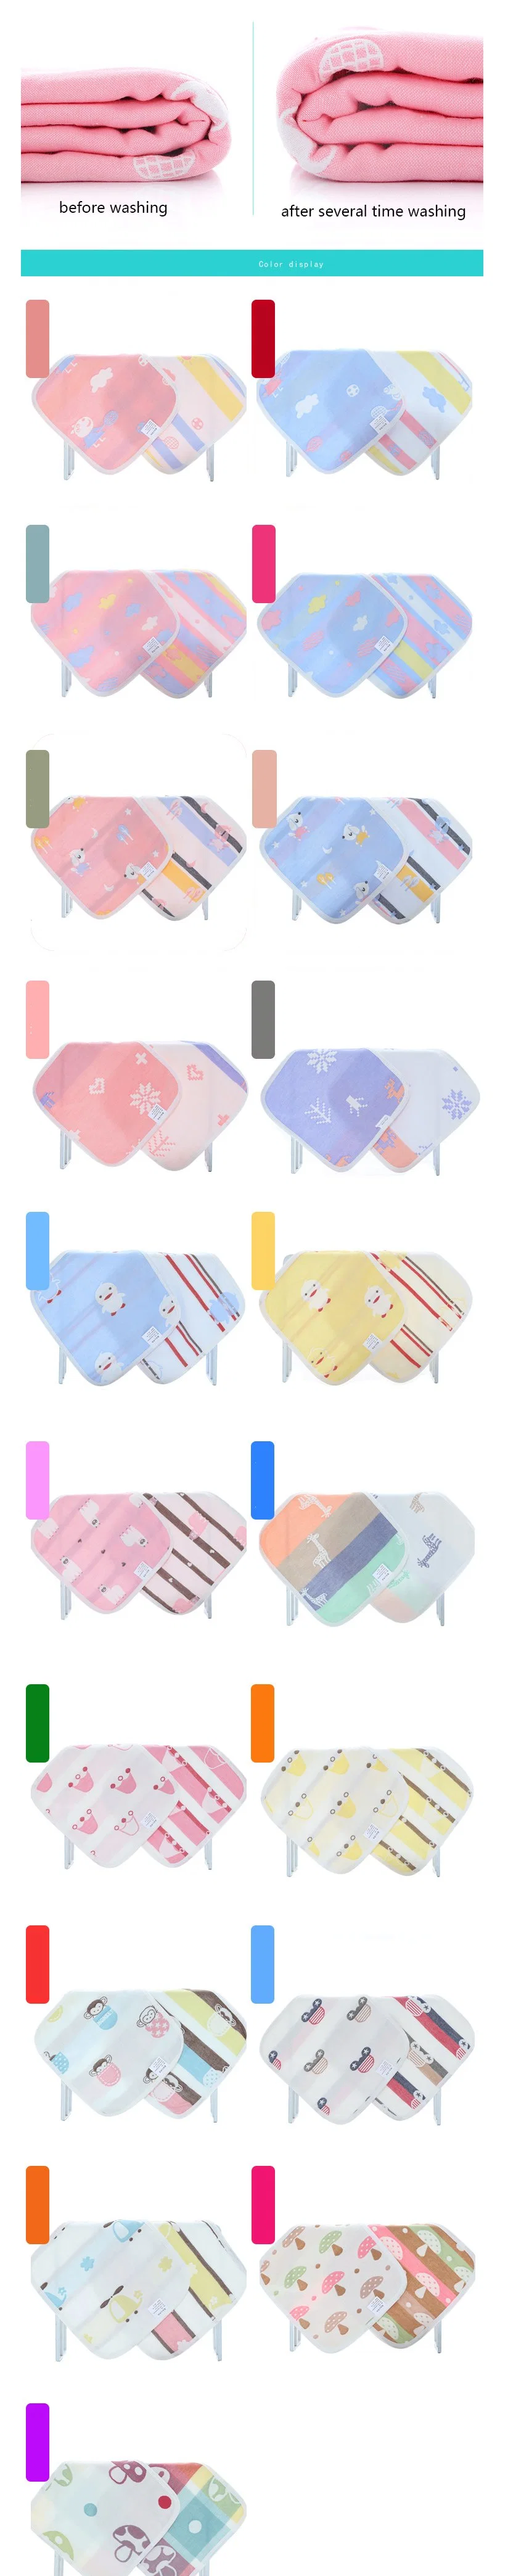 Hot Sale 100% Bamboo or Bamboo Cotton Blended Washcloths Towel for Baby or Makeup Usage Super Soft and Absorbent